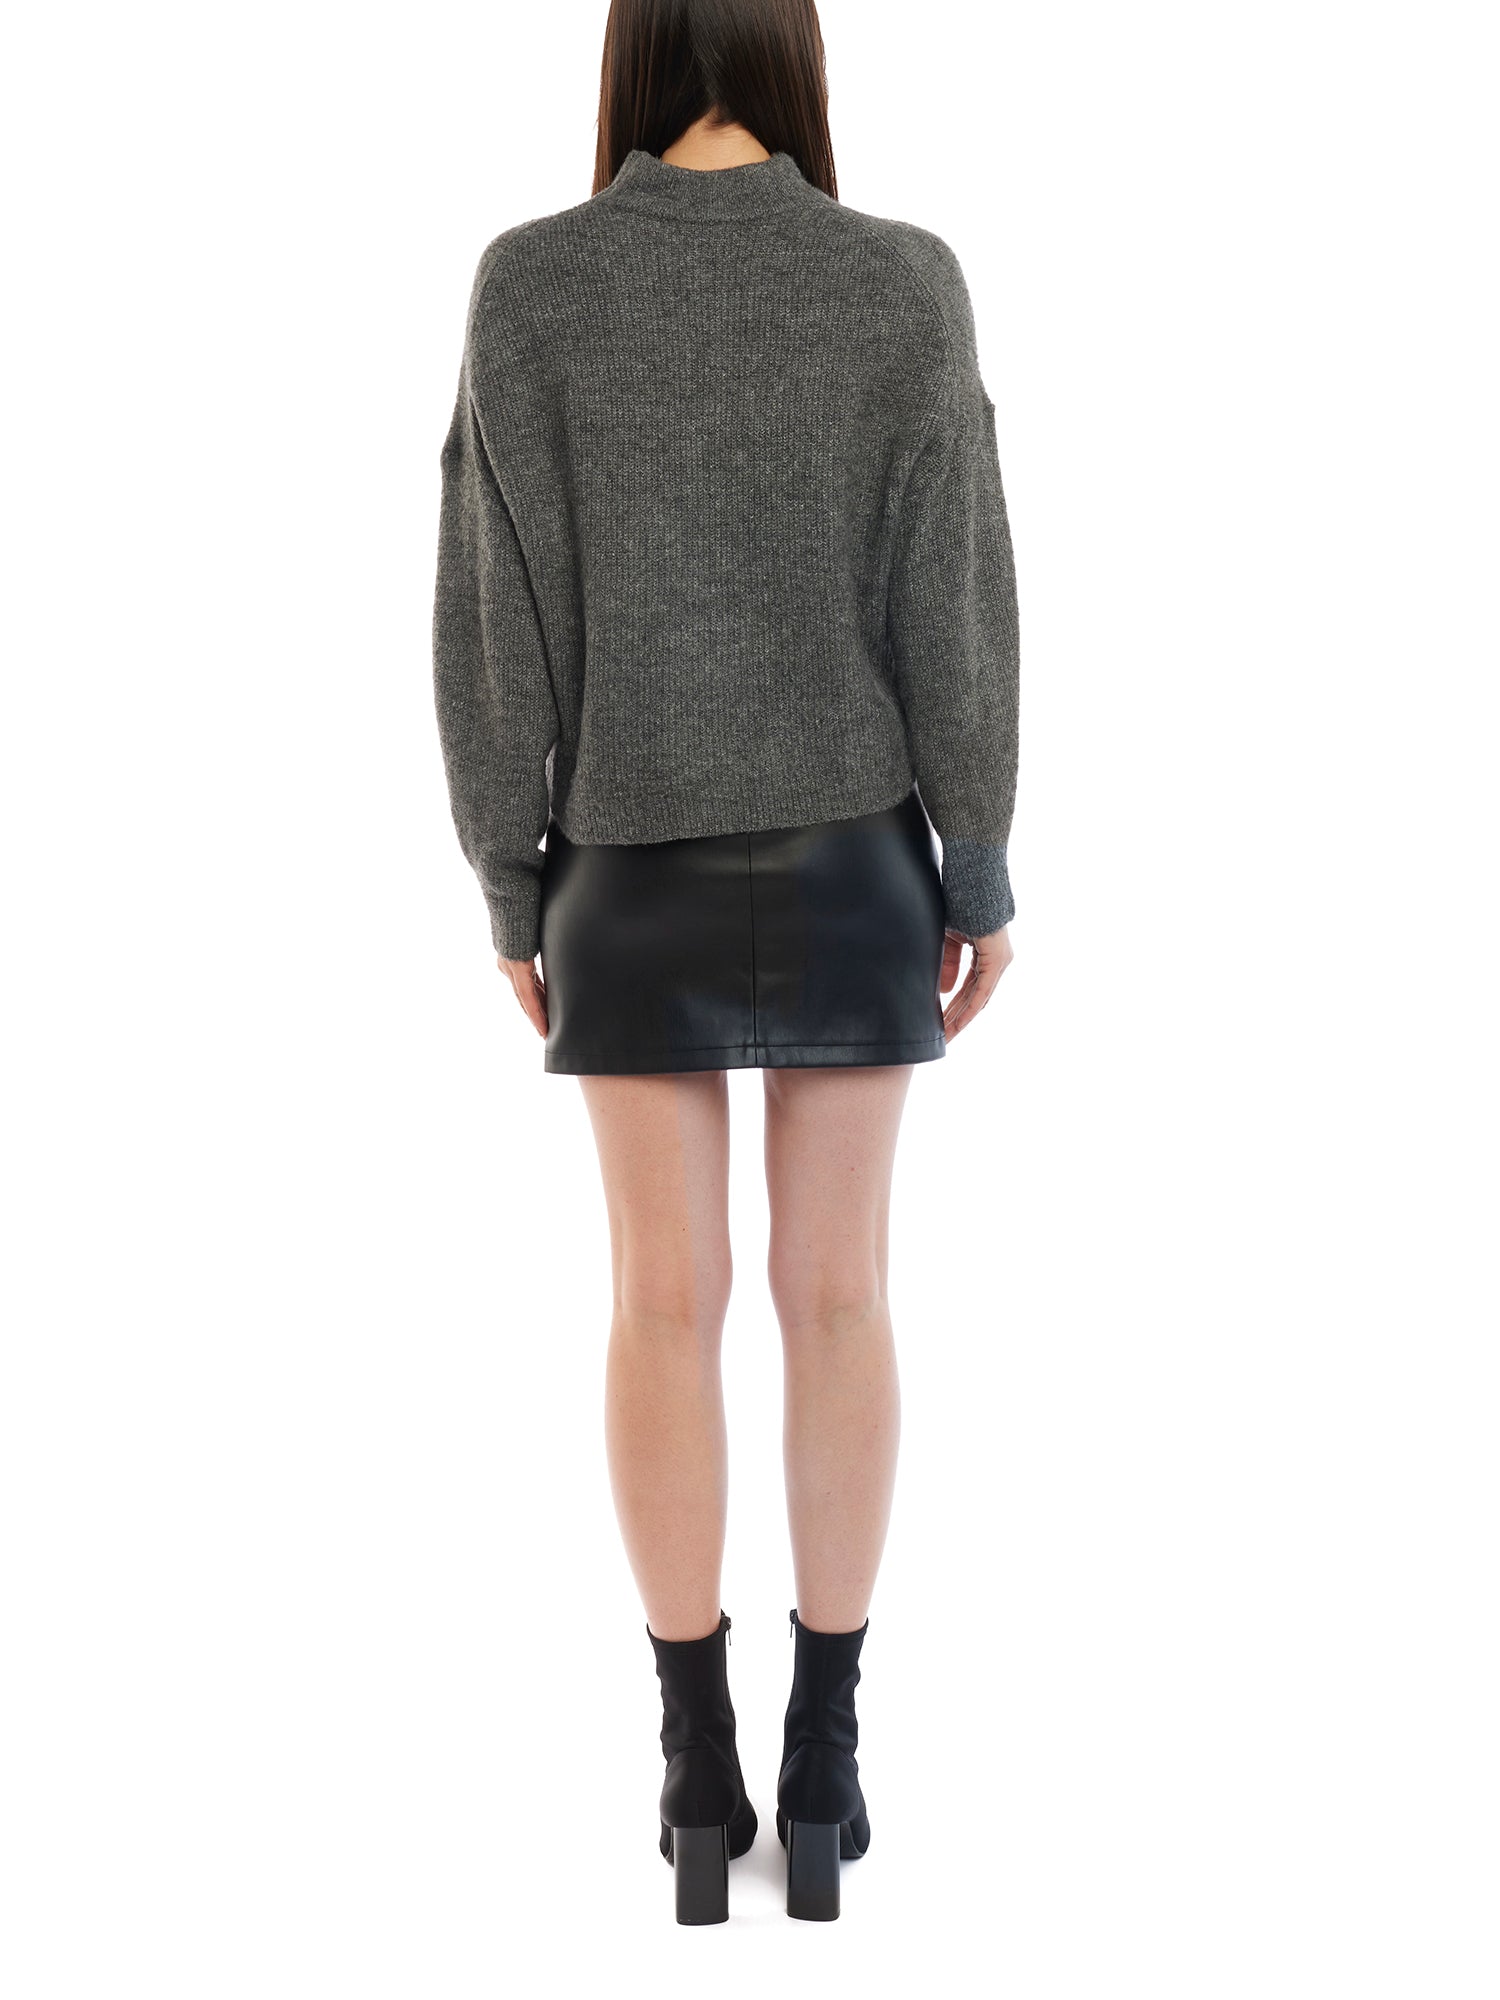 mock sweater features long sleeves and slightly cropped length in dark heather grey